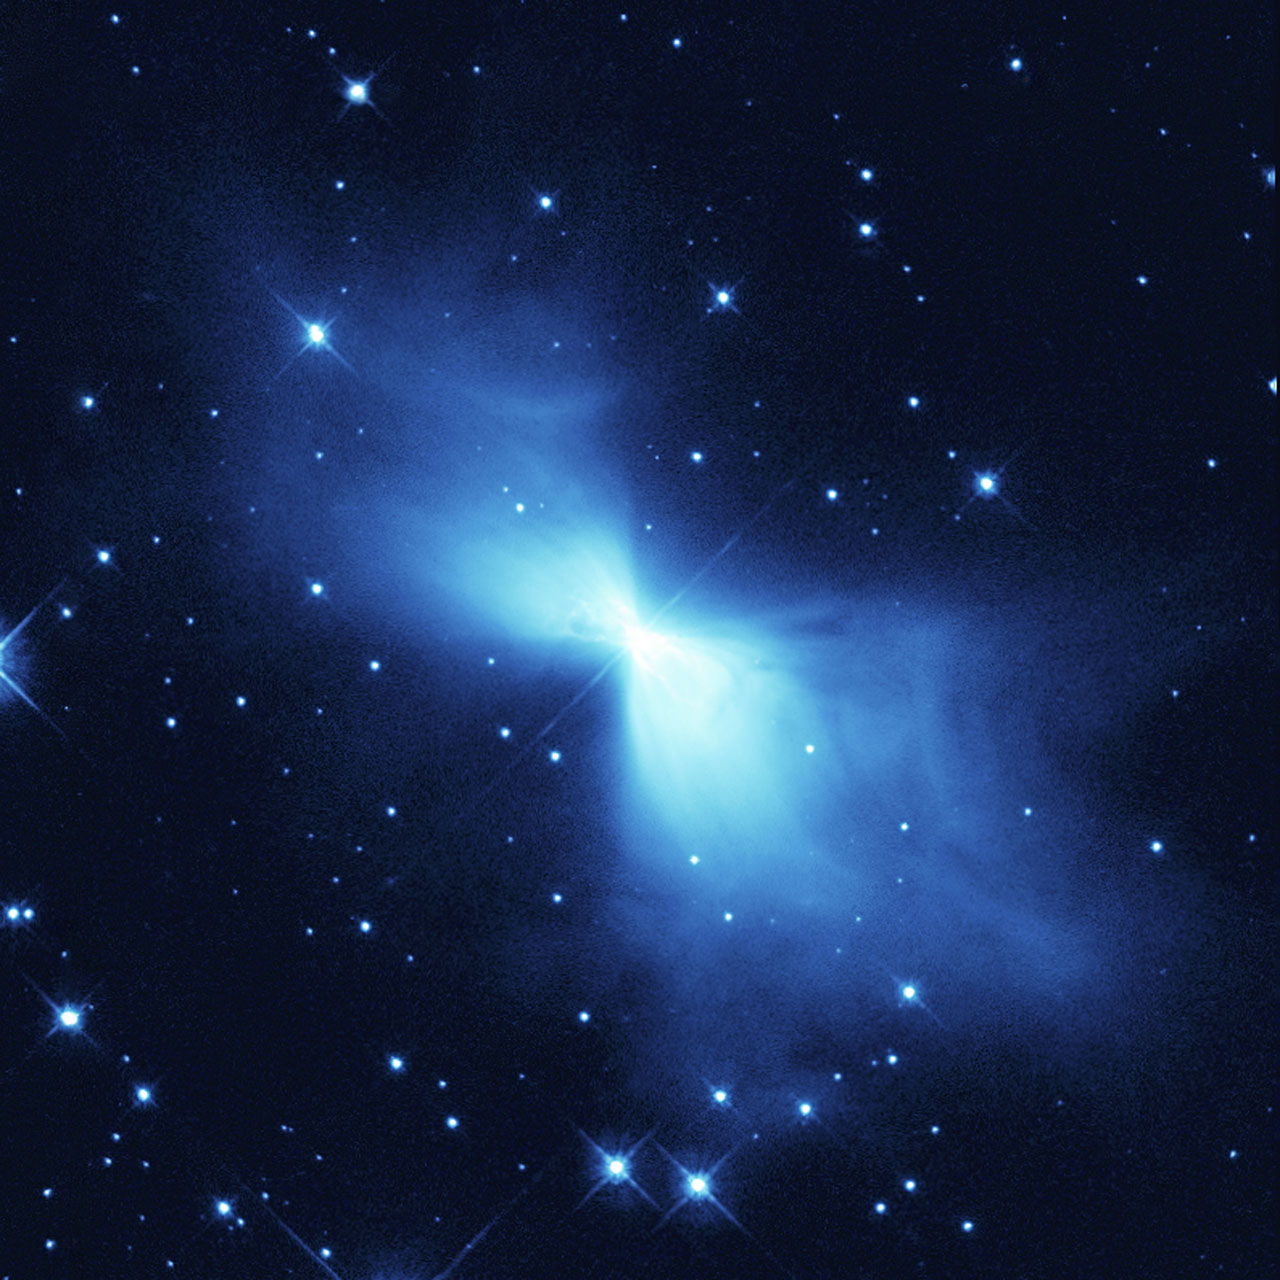 http://www.spacetelescope.org/static/archives/images/screen/heic0301a.jpg